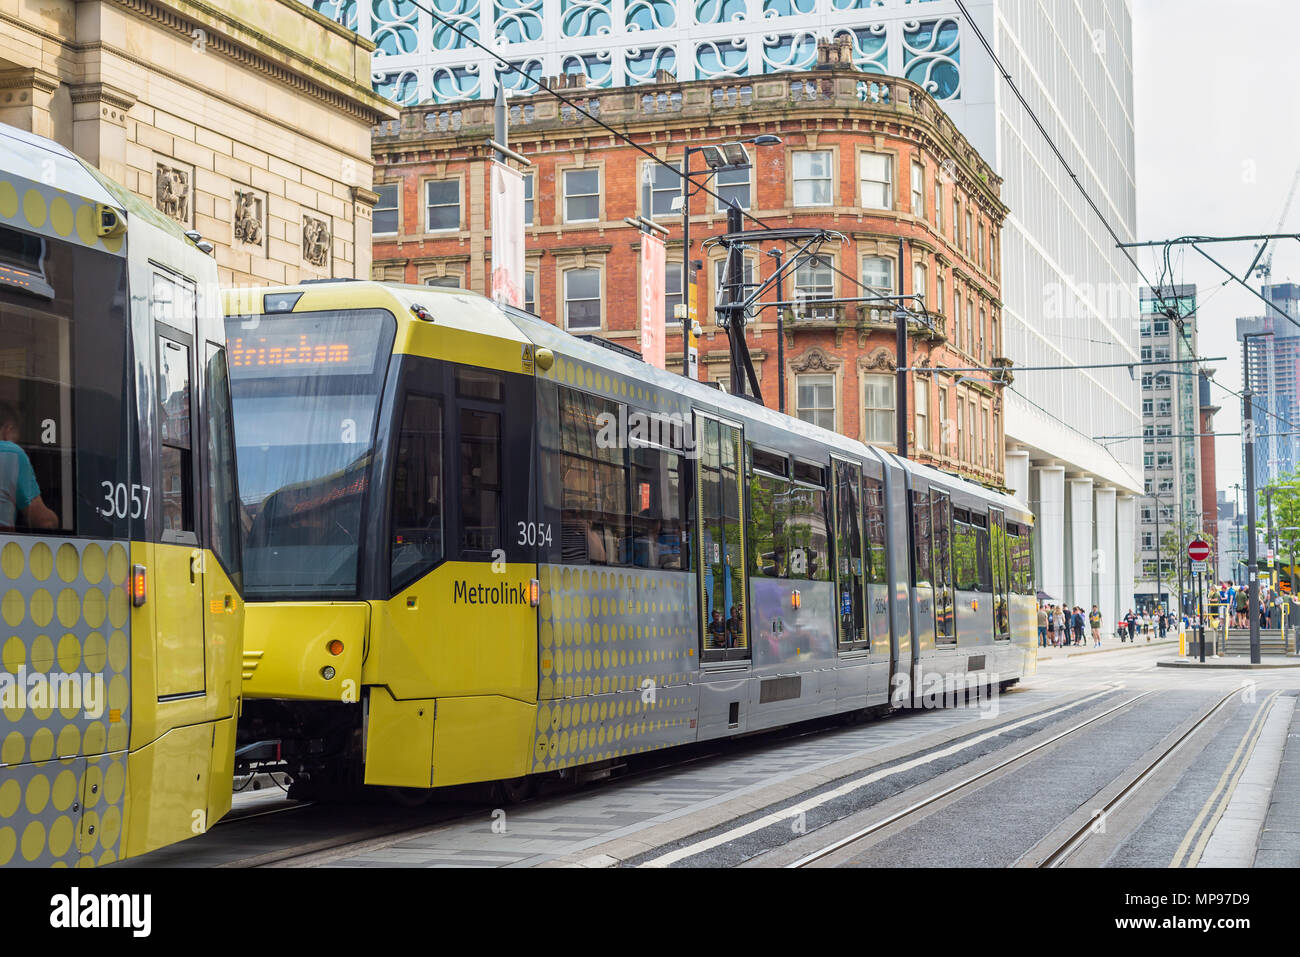 MANCHESTER, ENGLAND - 20 MAY, 2018: A tram on the Metrolink light rail system in the city centre of Manchester Stock Photo